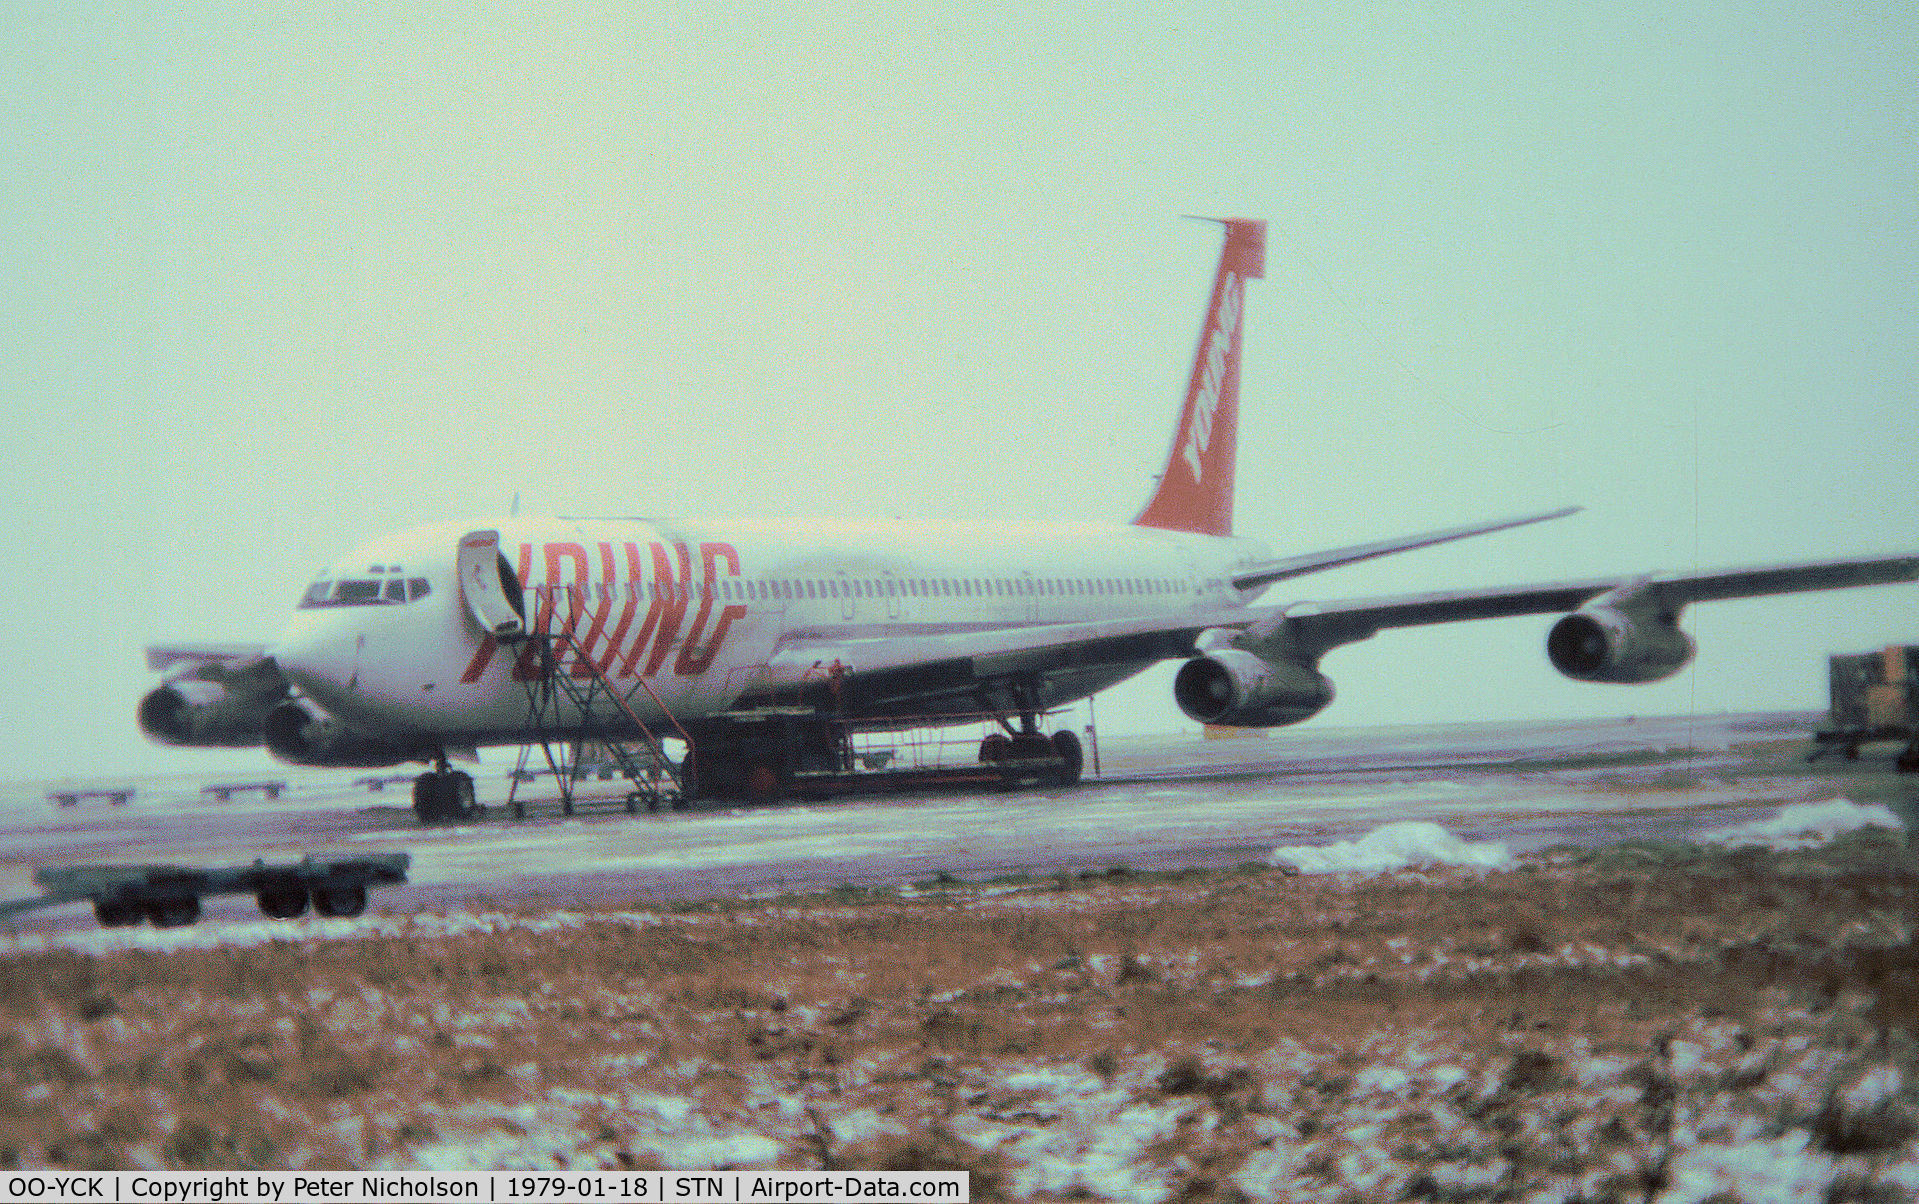 OO-YCK, 1967 Boeing 707-338C (E-8C) C/N 19621, Boeing 707-338C of Young Air Cargo as seen at Stansted in January 1979.